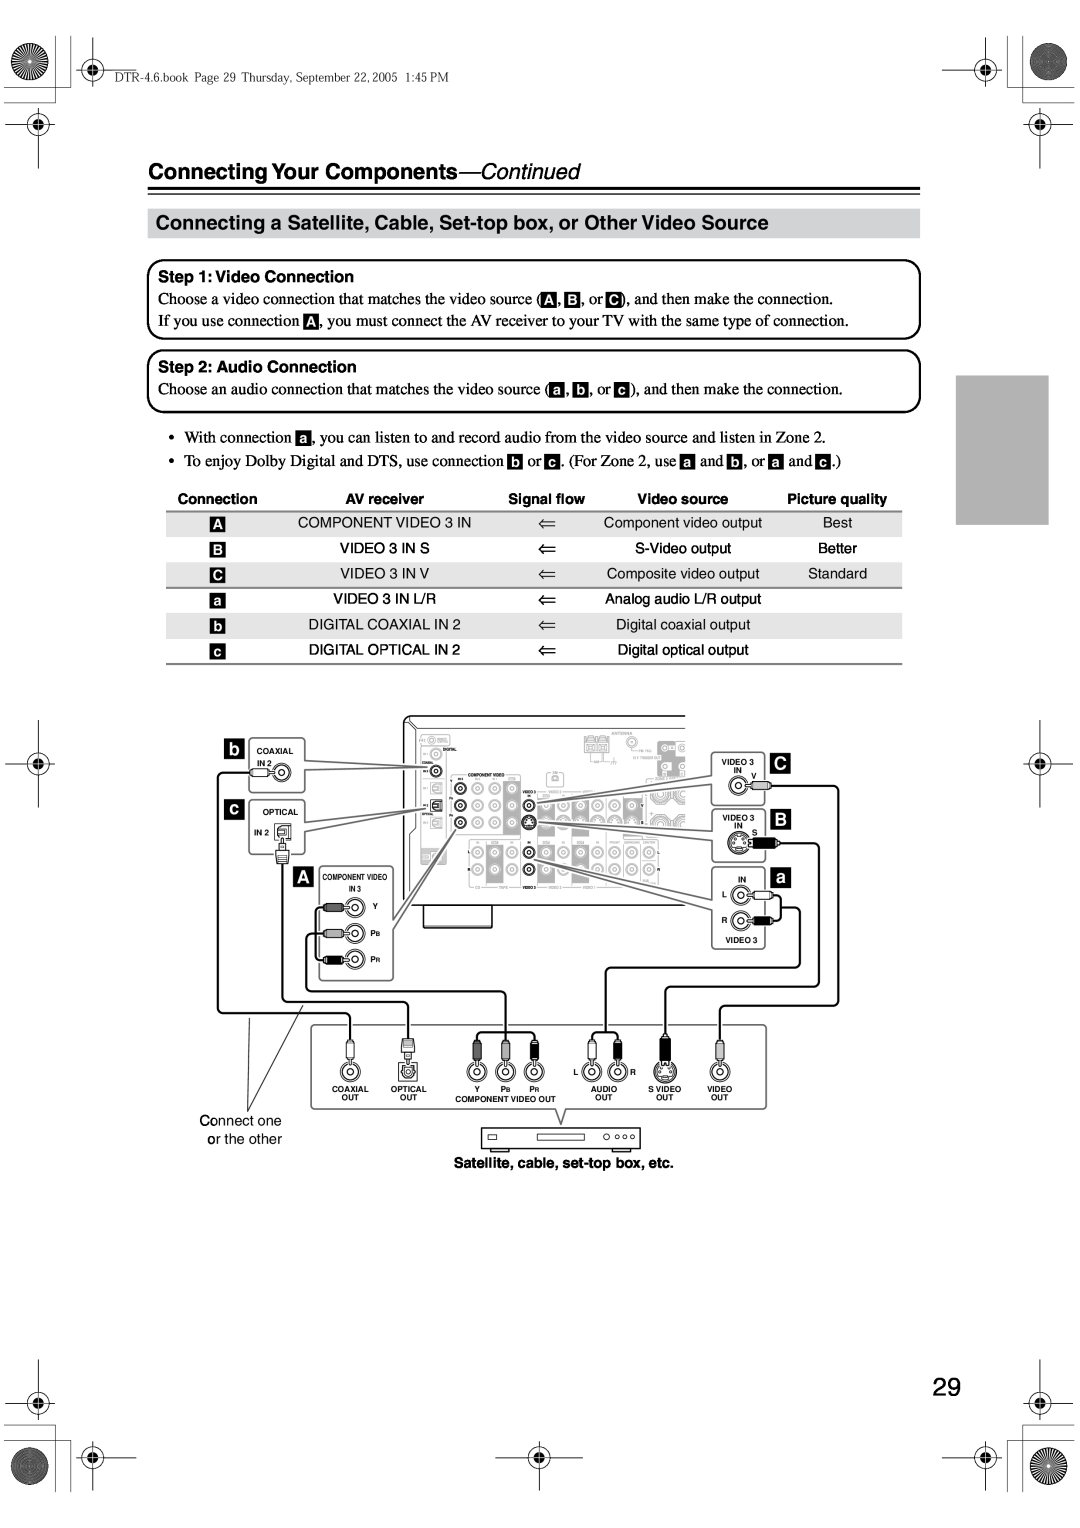 Integra DTR-4.6 instruction manual Connecting Your Components—Continued, C B a, Satellite, cable, set-topbox, etc 